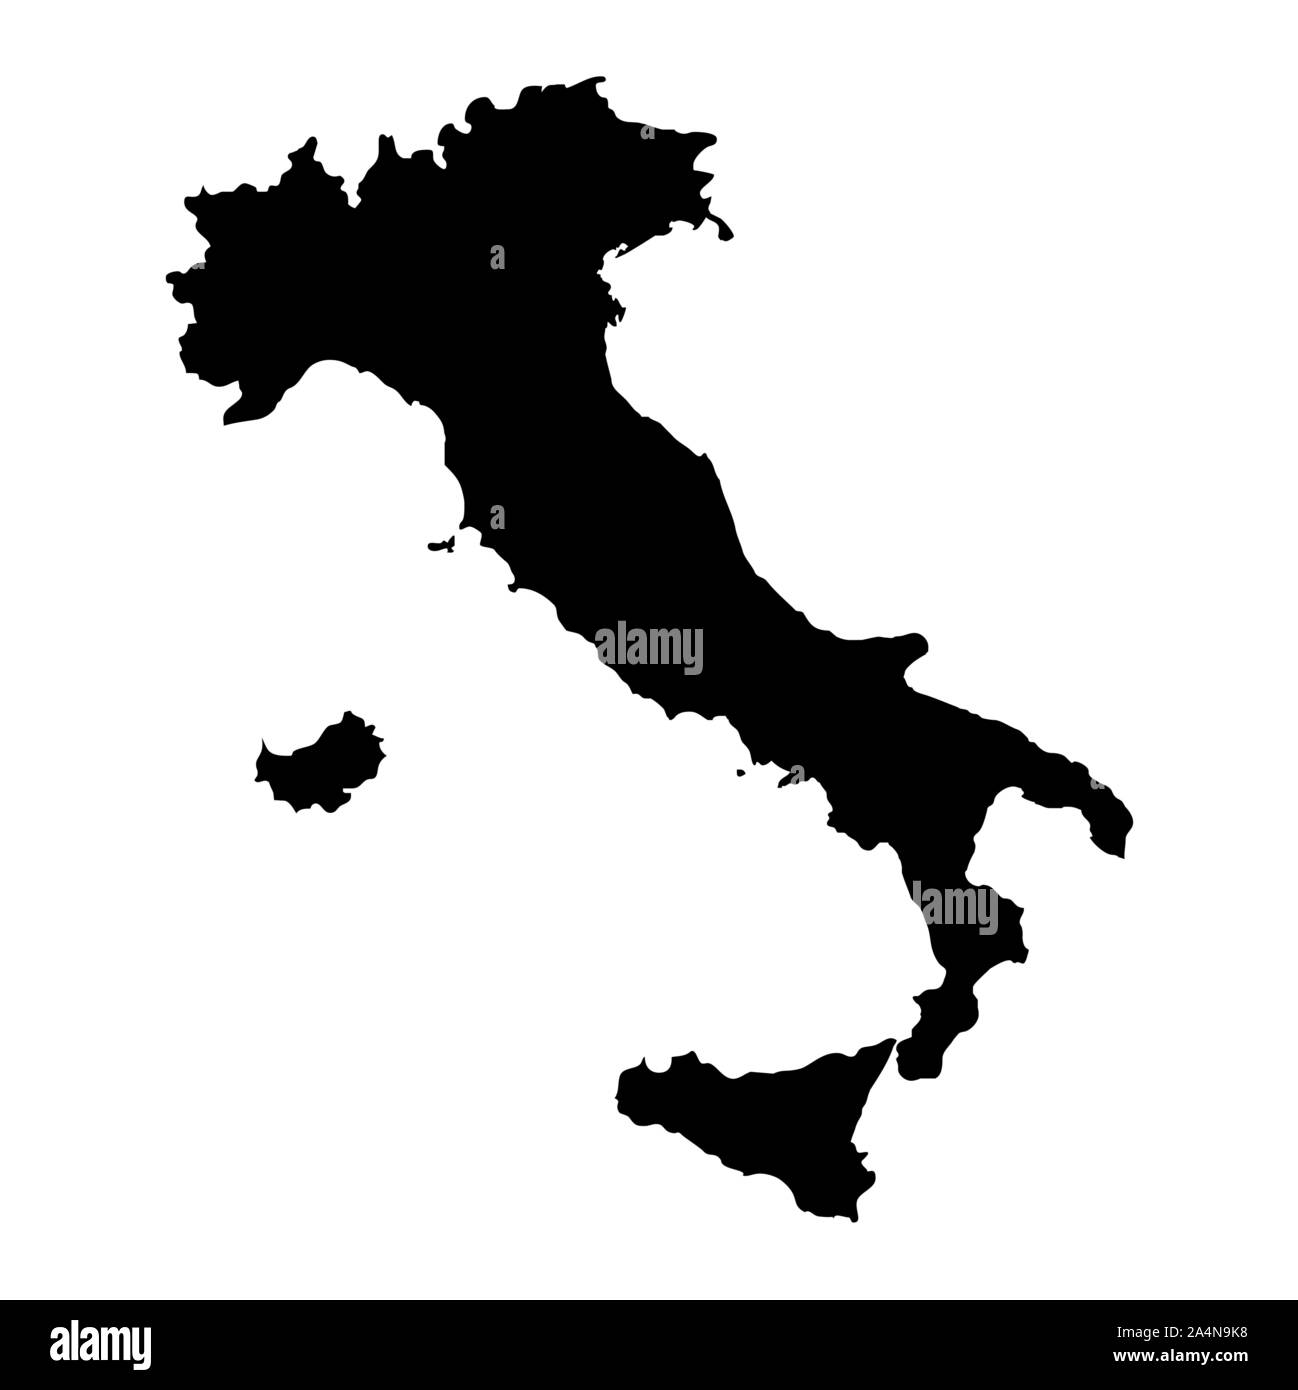 Italy silhouette map Stock Vector